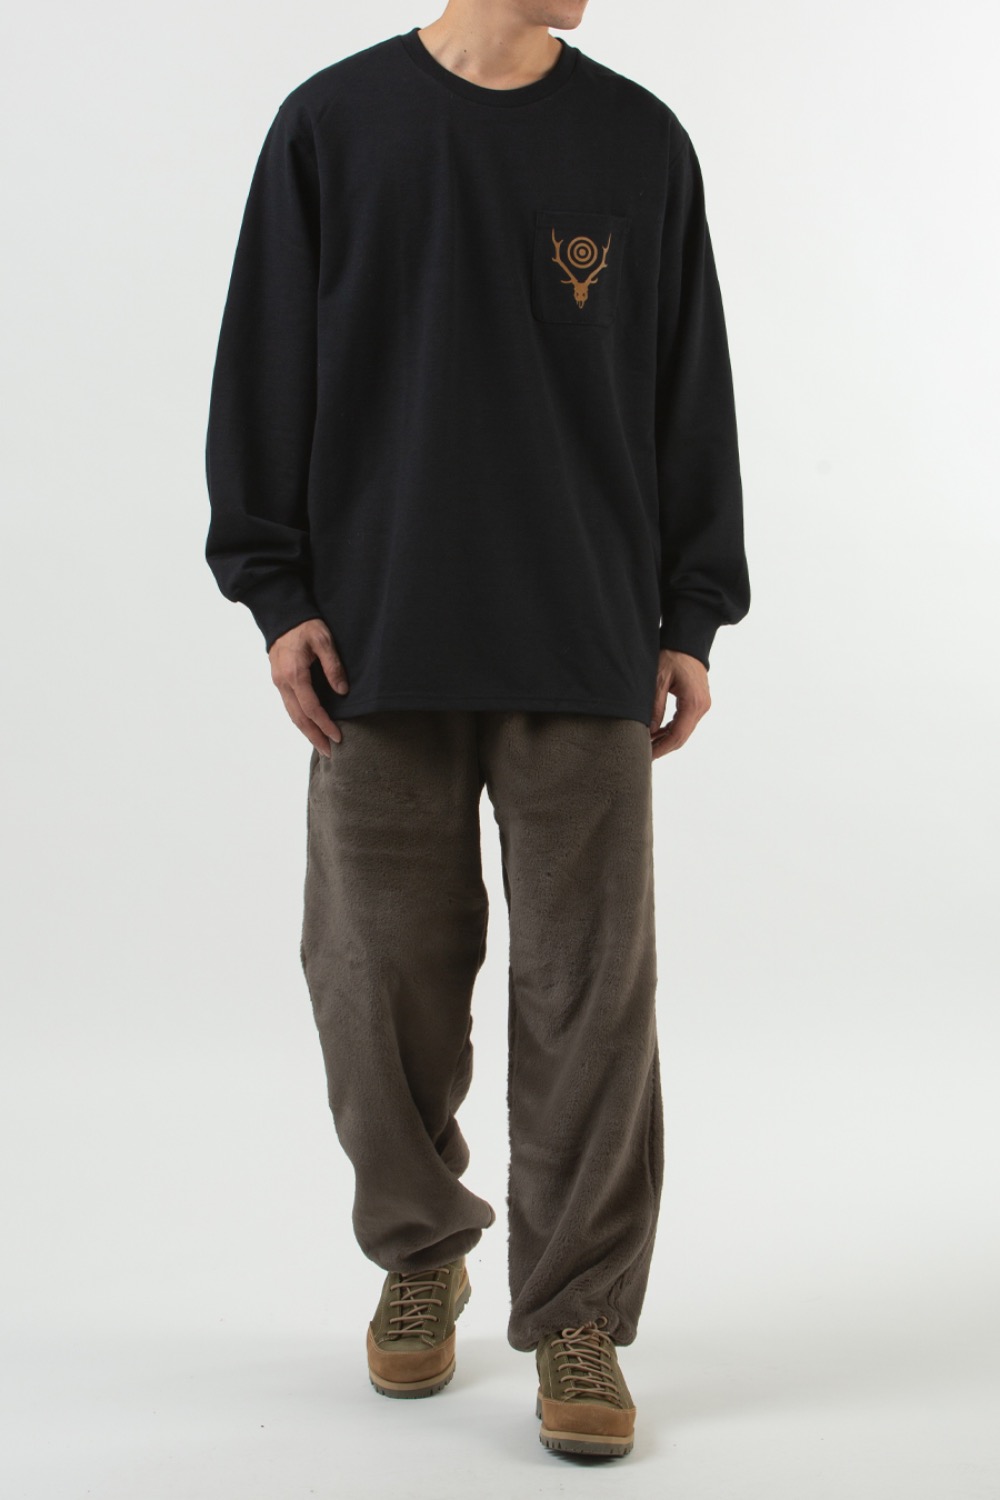 SOUTH2 WEST8 L/S ROUND POCKET TEE - CIRCLE HORN BLACK